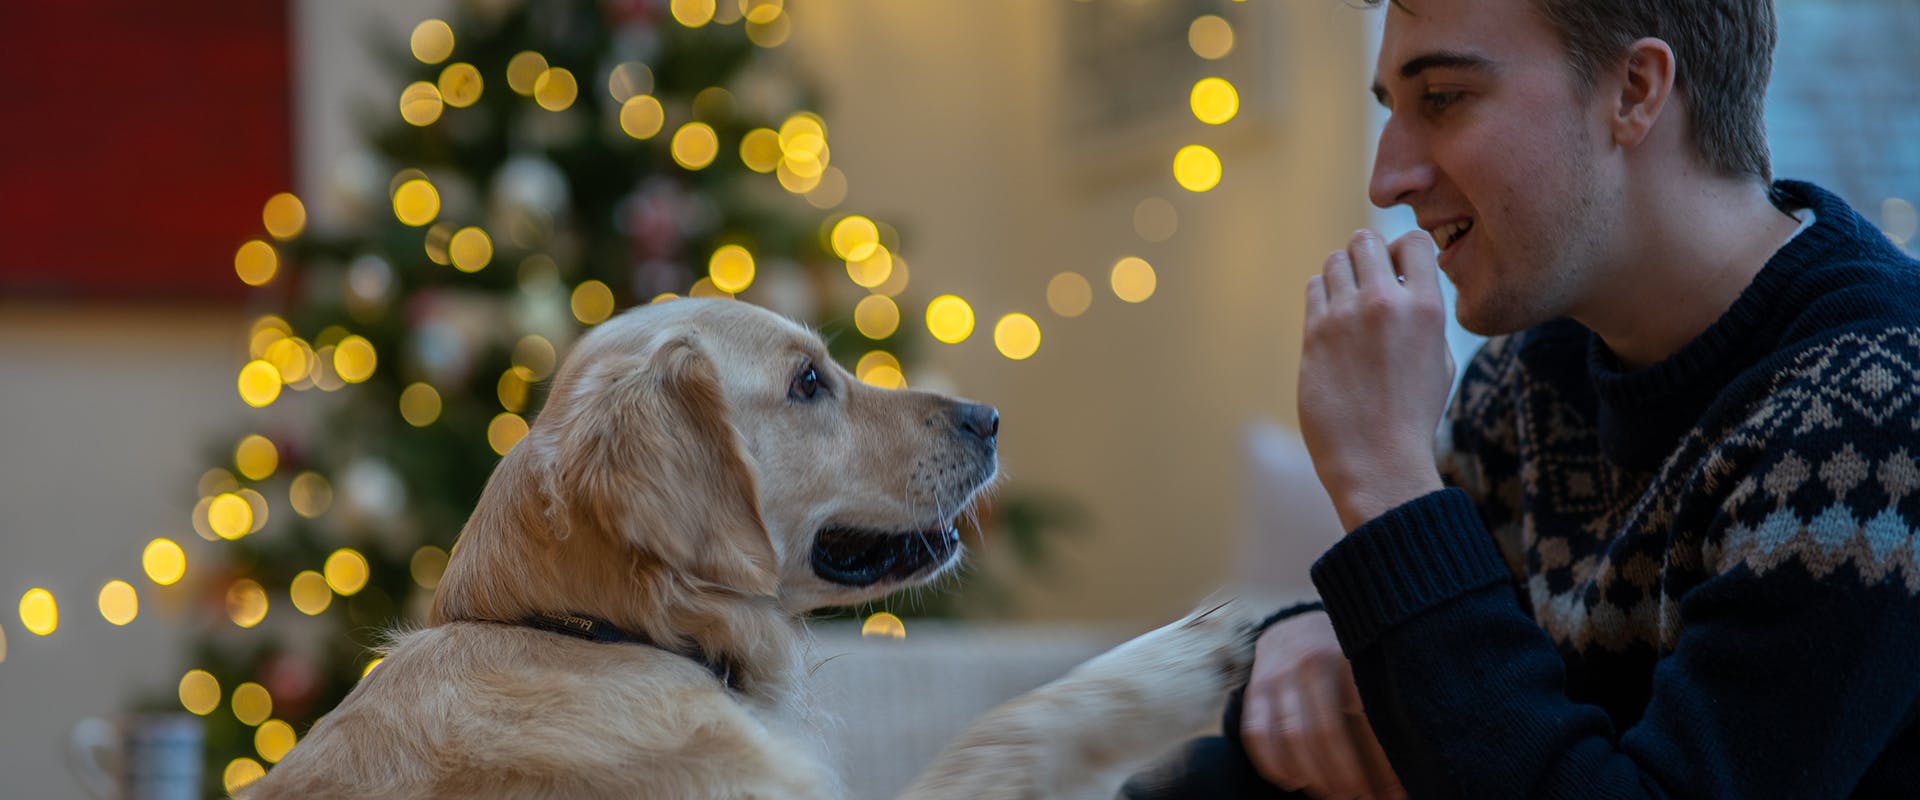 A man holding up a treat for a dog who is doing a 'paw trick'; a brightly lit Christmas tree in the background